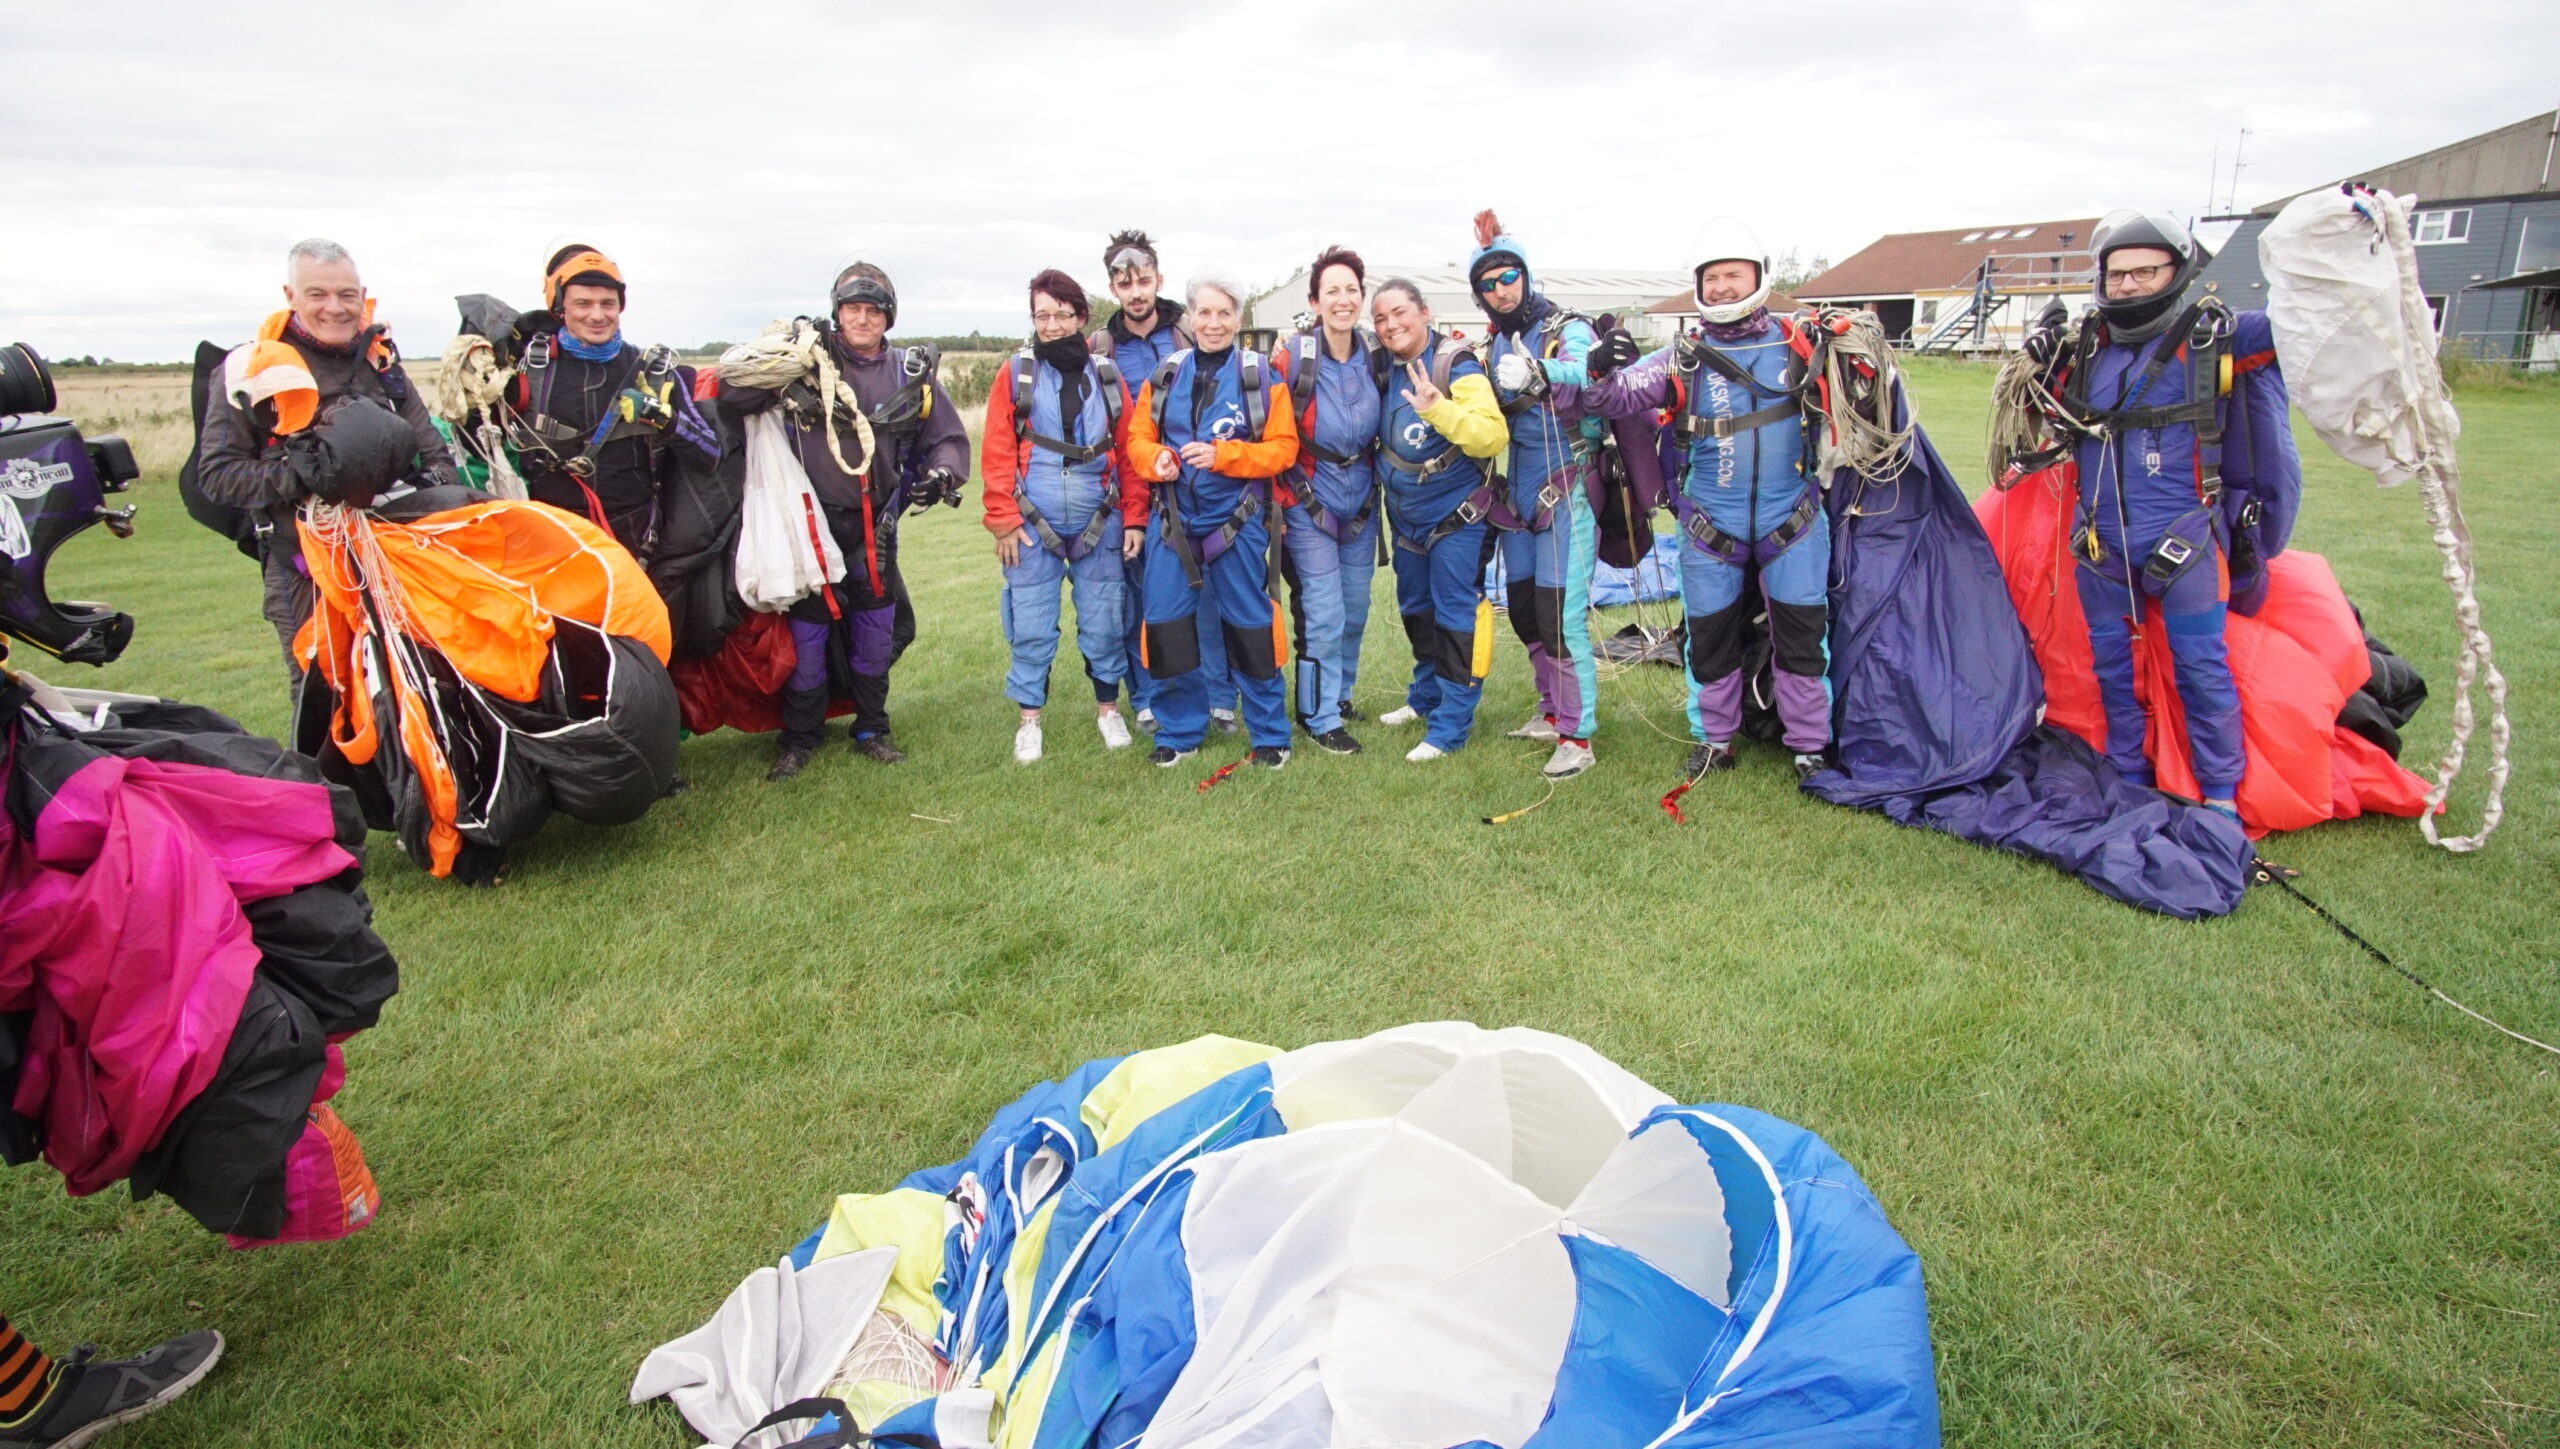 A group of family and friends at a memorial skydive